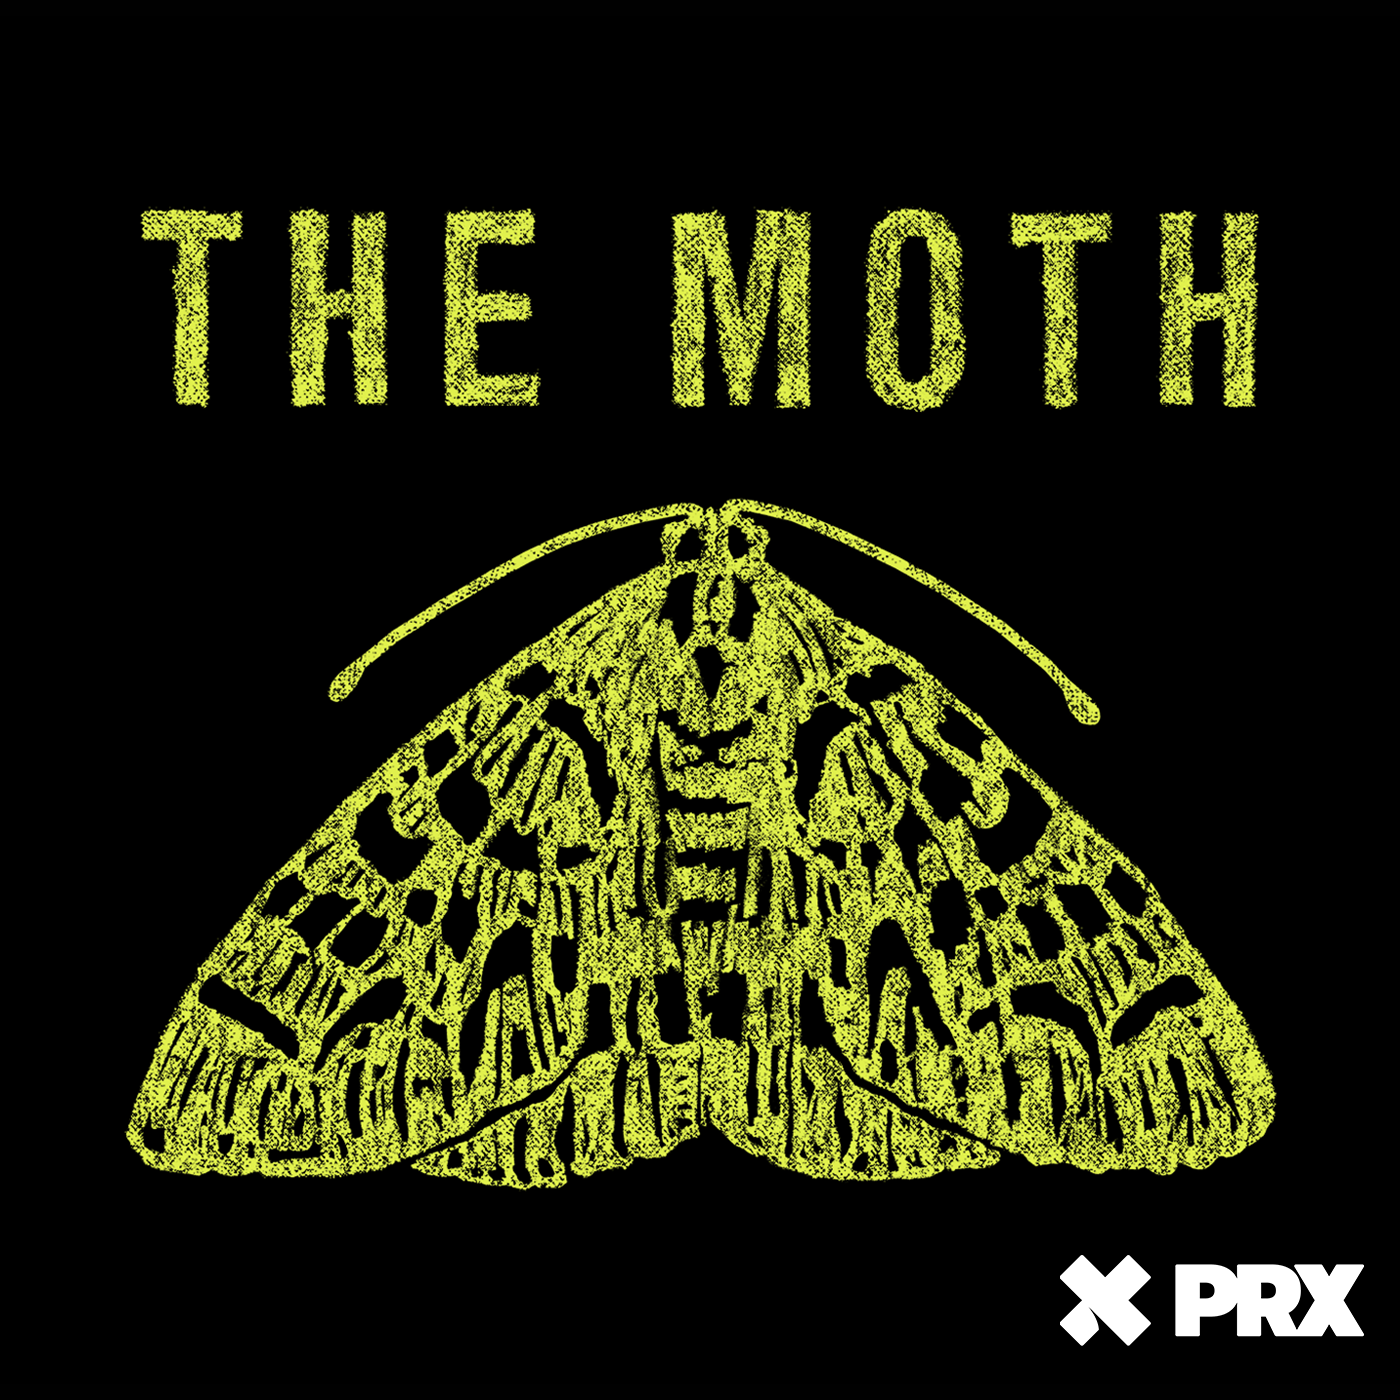 Special Announcement: The Moth's Mainstage Tour Dates!